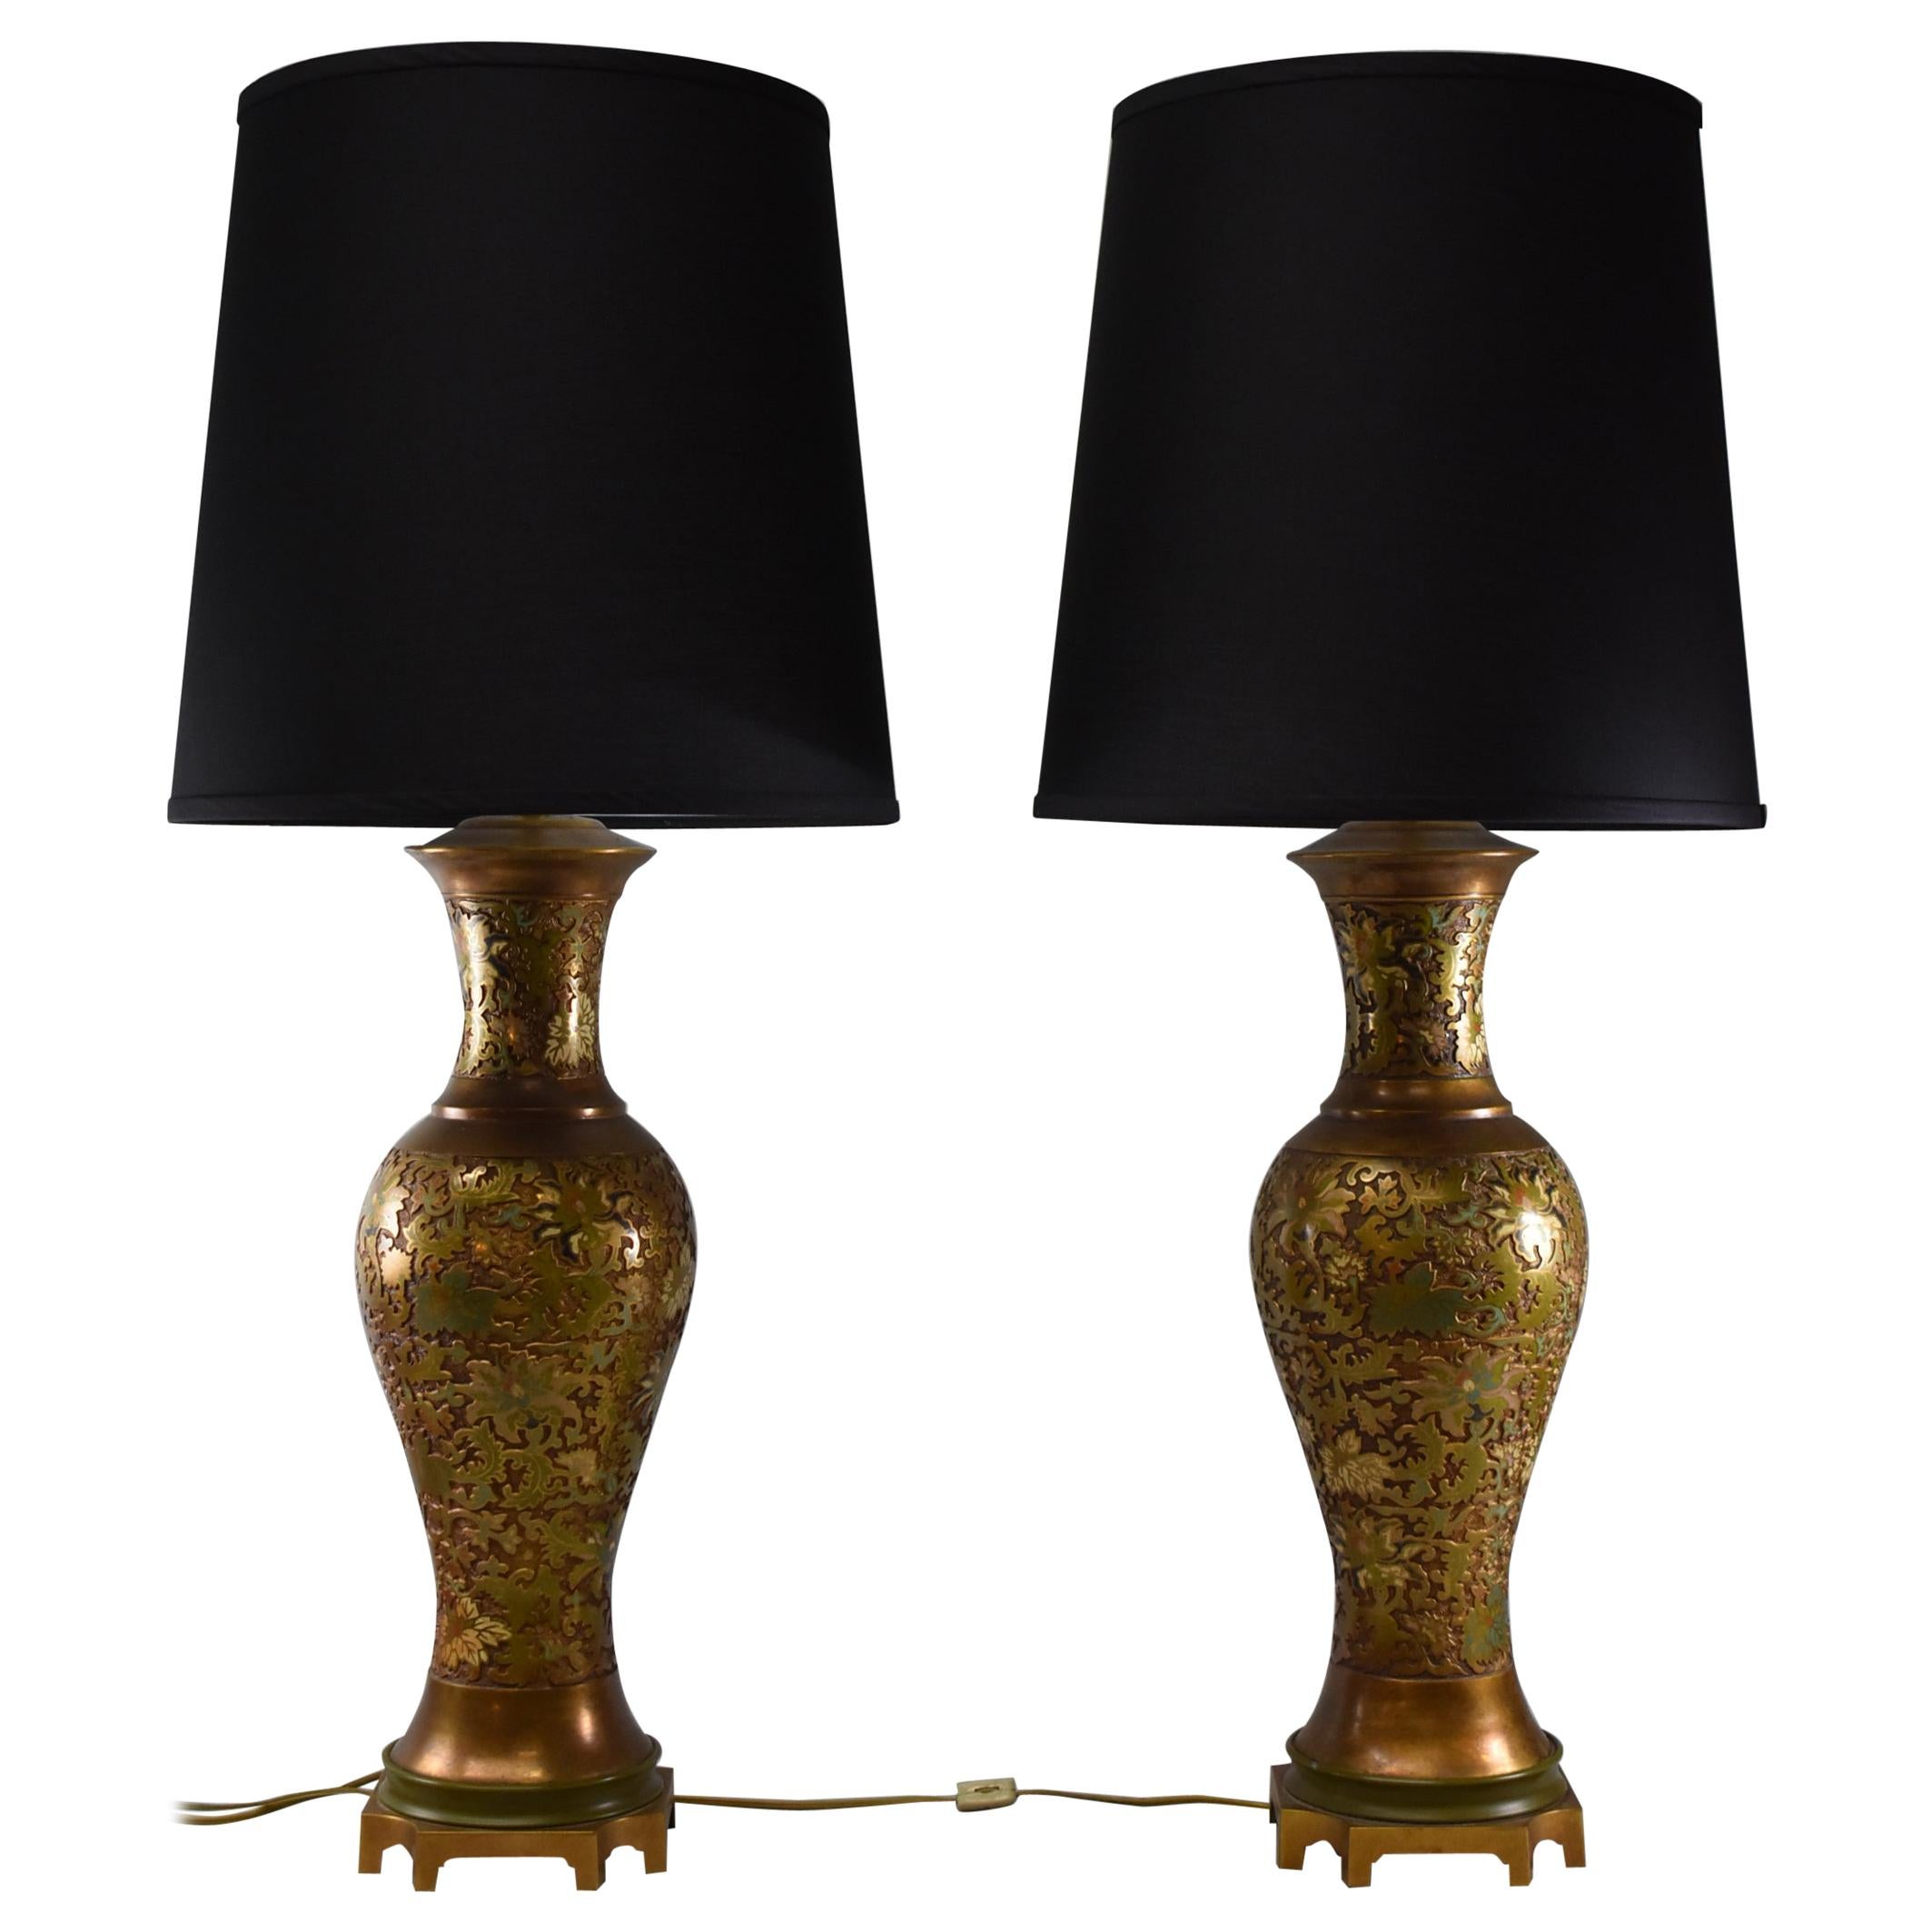 Pair of Brass Marbro Champlevé Enamel Floral Table Lamps